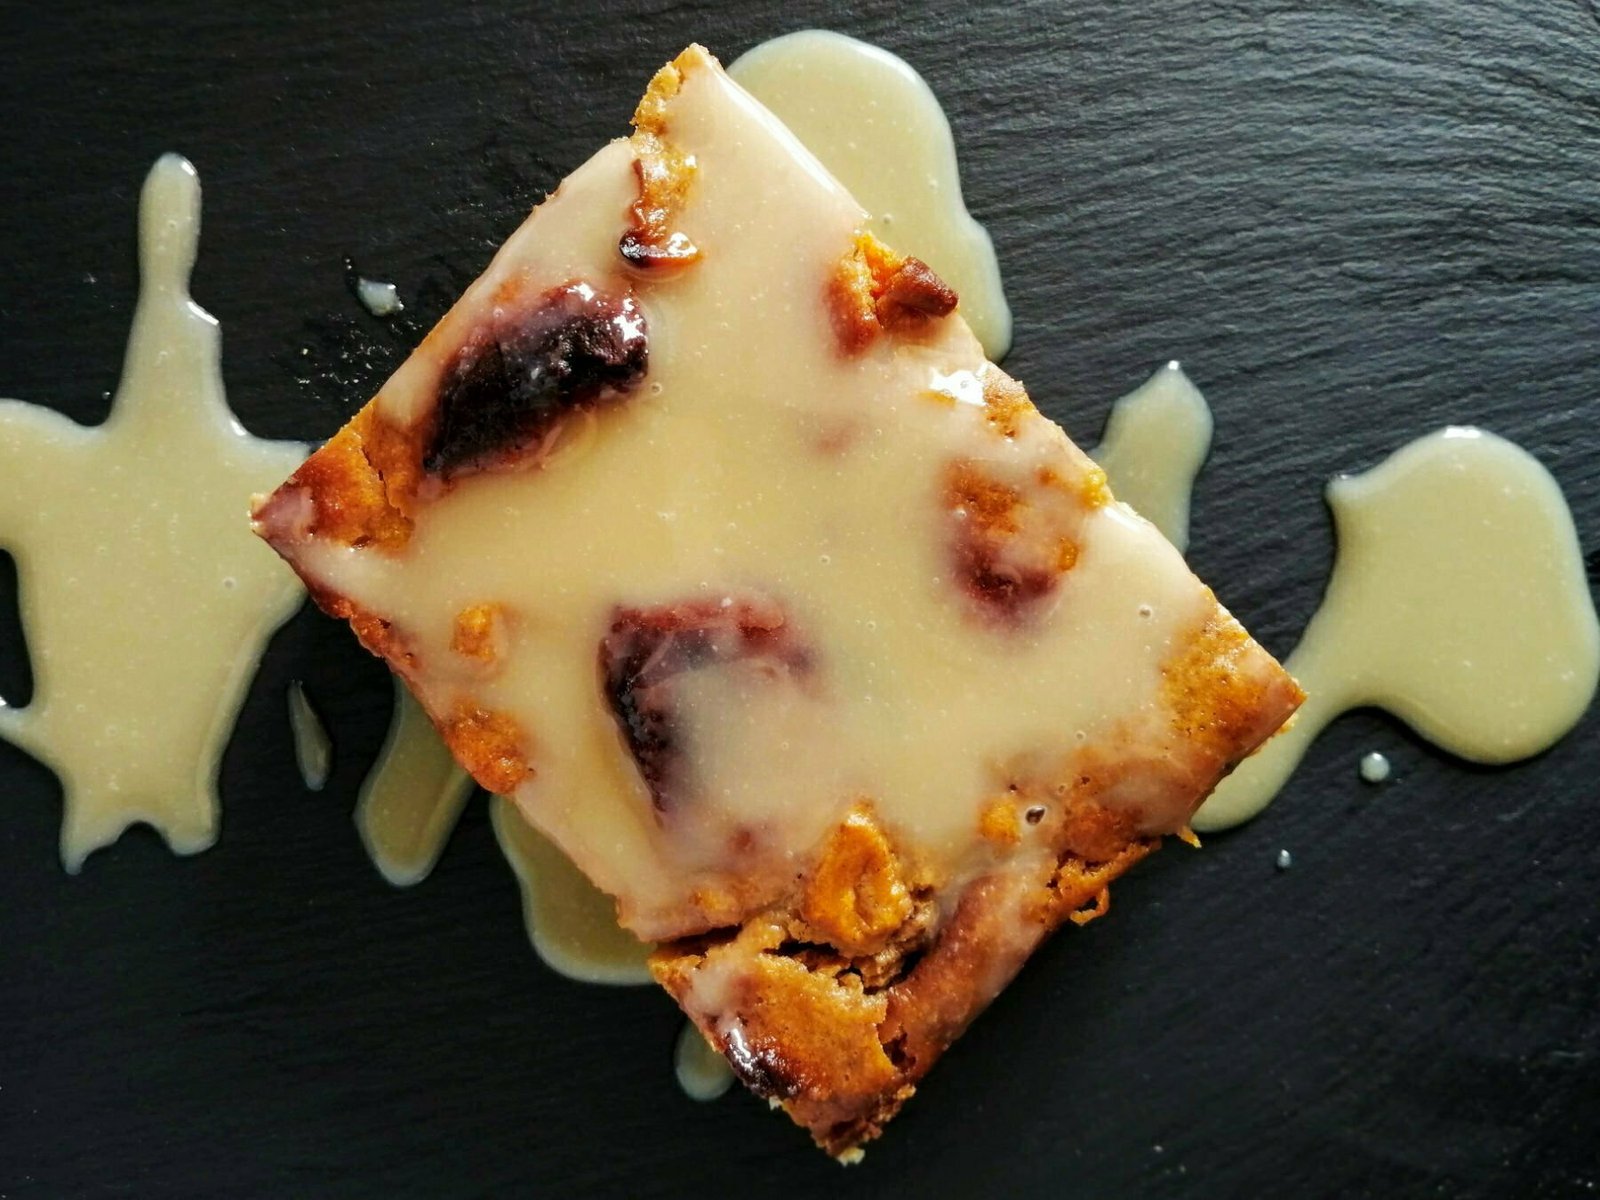 Pumpkin bread pudding sits on a slate plate with a gooey caramel sauce drizzled on top